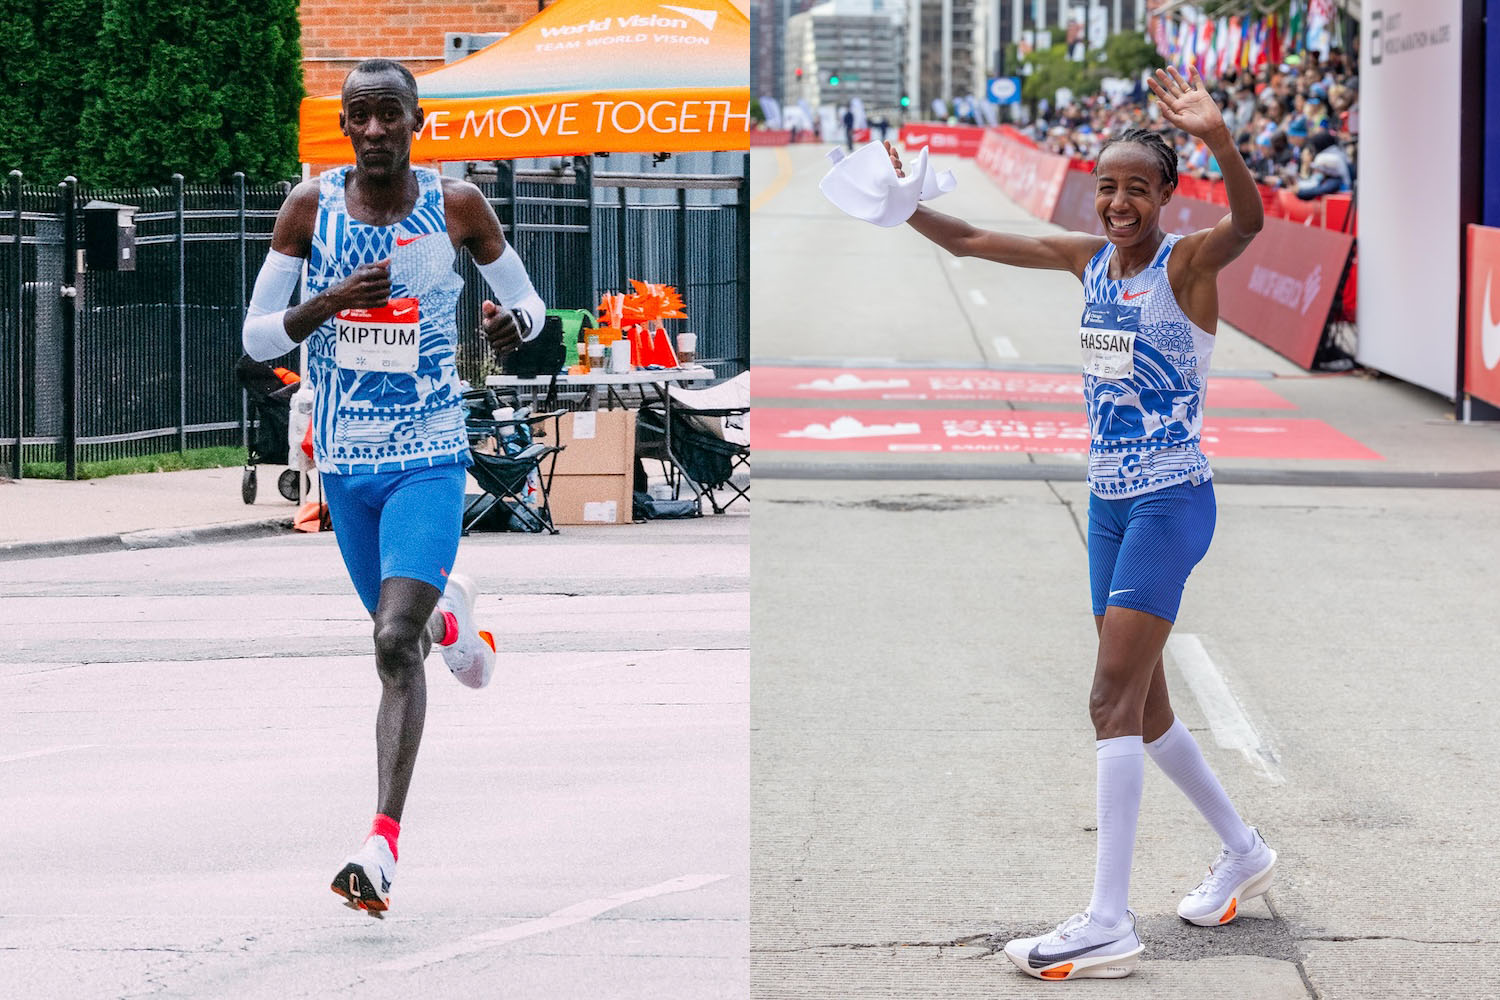 Two runners racing in the Nike Alphafly 3 Proto